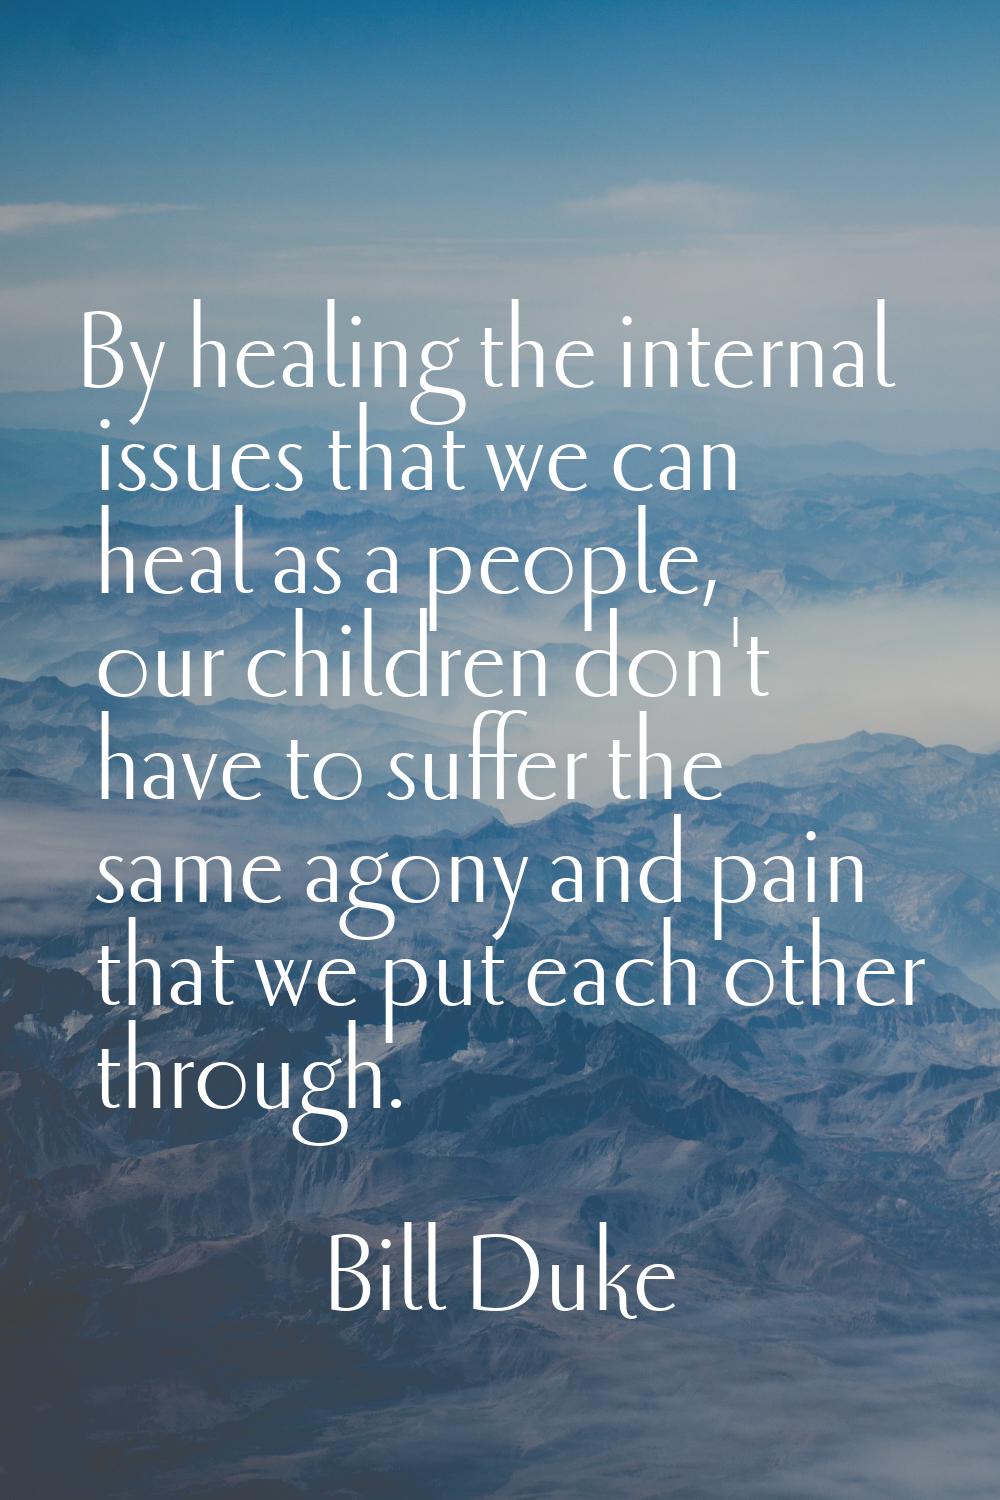 By healing the internal issues that we can heal as a people, our children don't have to suffer the 